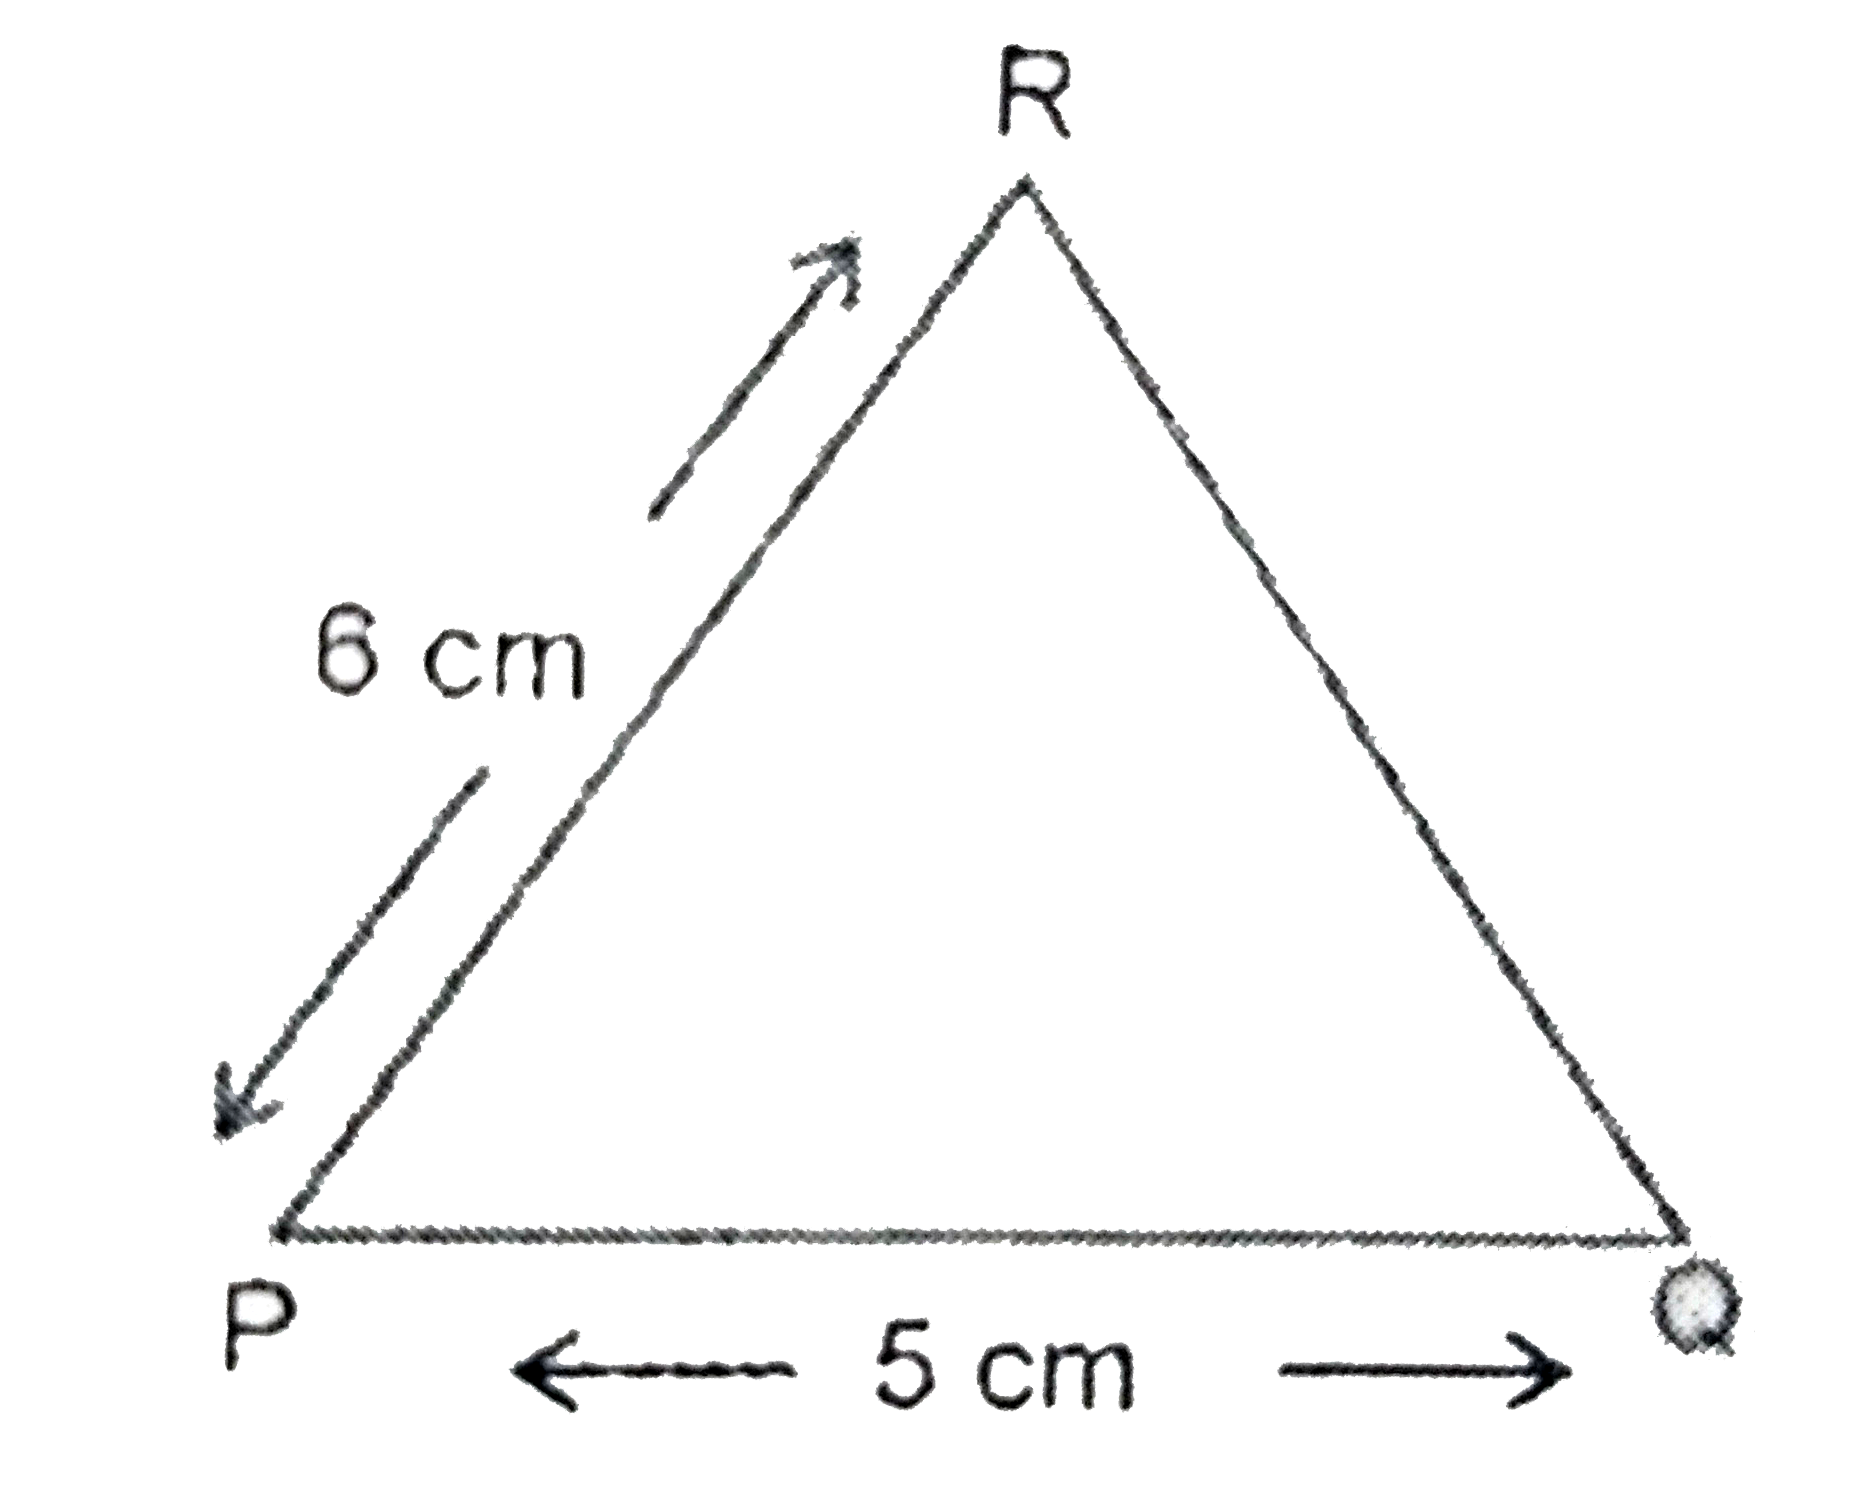 Two persons A and B are 40 m apart. Triangulation method was used to measure the distance obtained is place C and the person A. The triangle obtained is as shown. The triangle is drawn from the positions of A and B and the vertices P, Q and R correspond to the position of A, B and the palce C, respectively. Determine the distance between the person A and the place C.